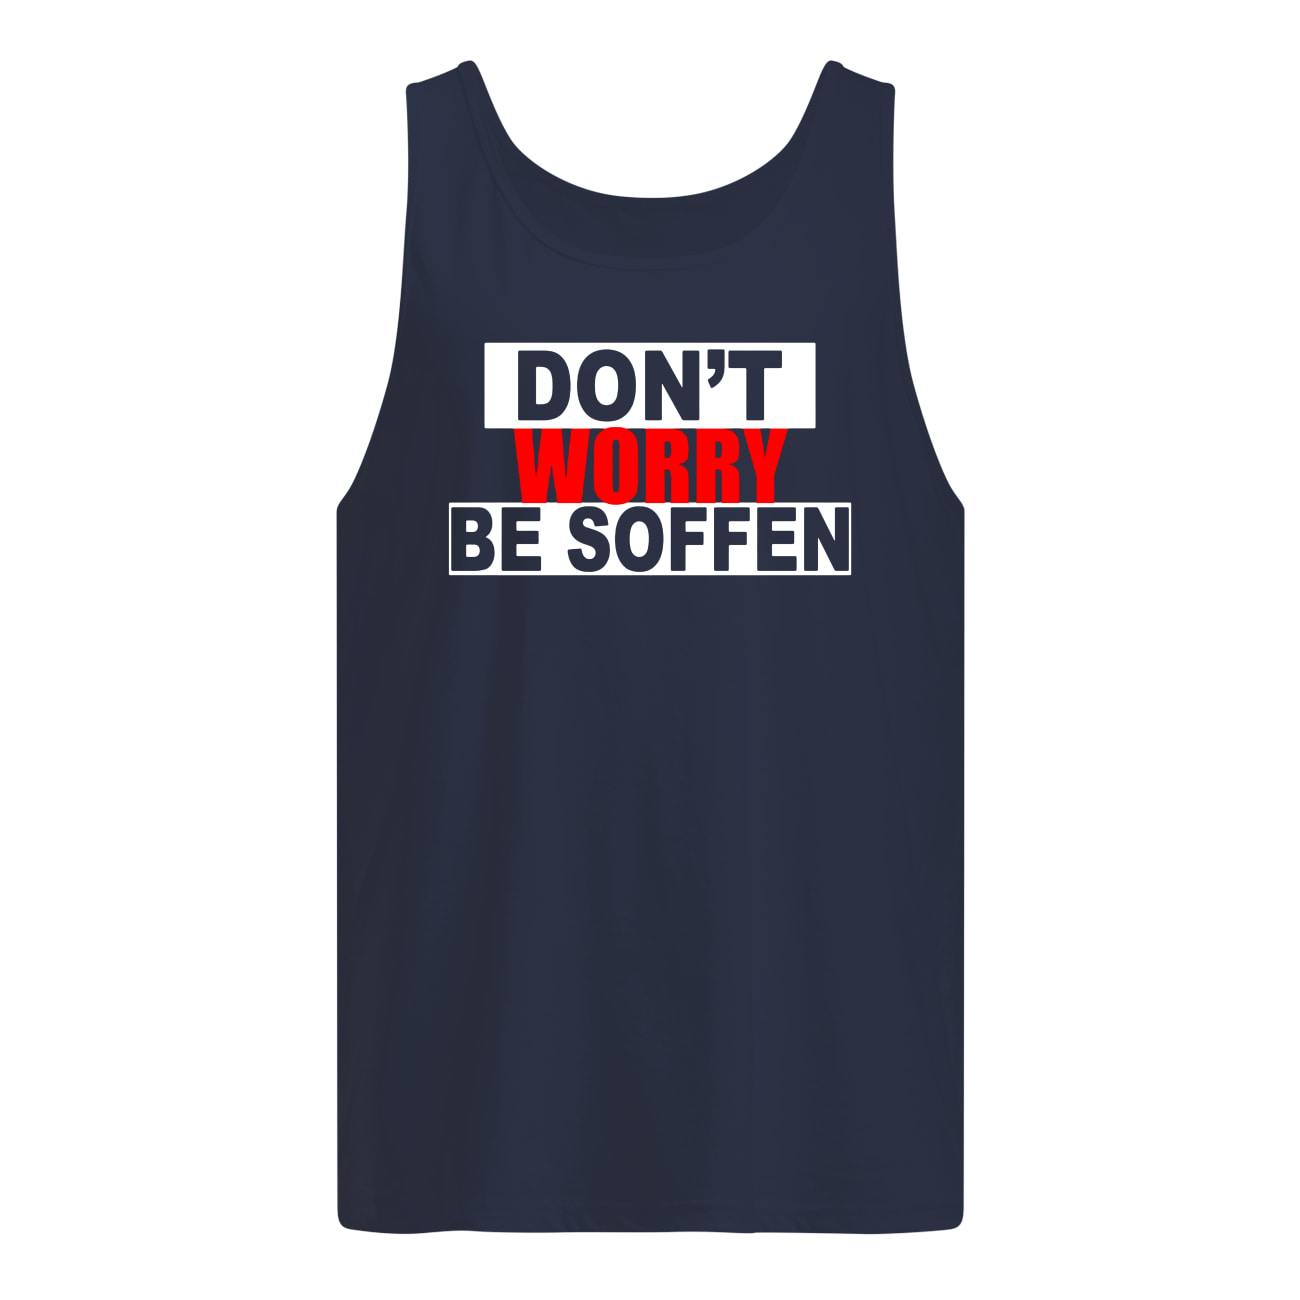 Don't worry be soffen tank top